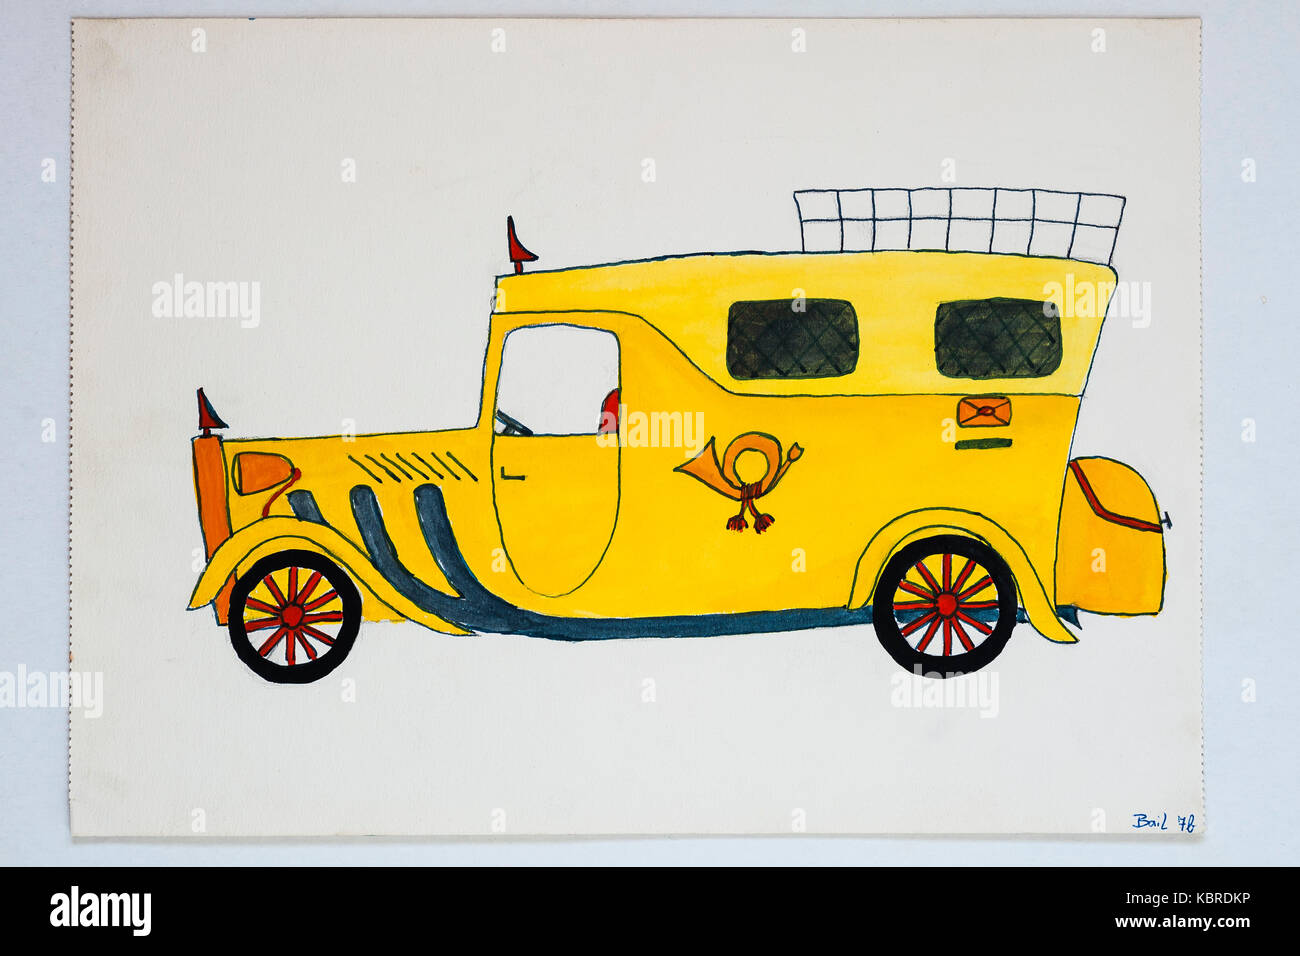 Postbus, drawing, children's drawing, 13 years, Germany Stock Photo